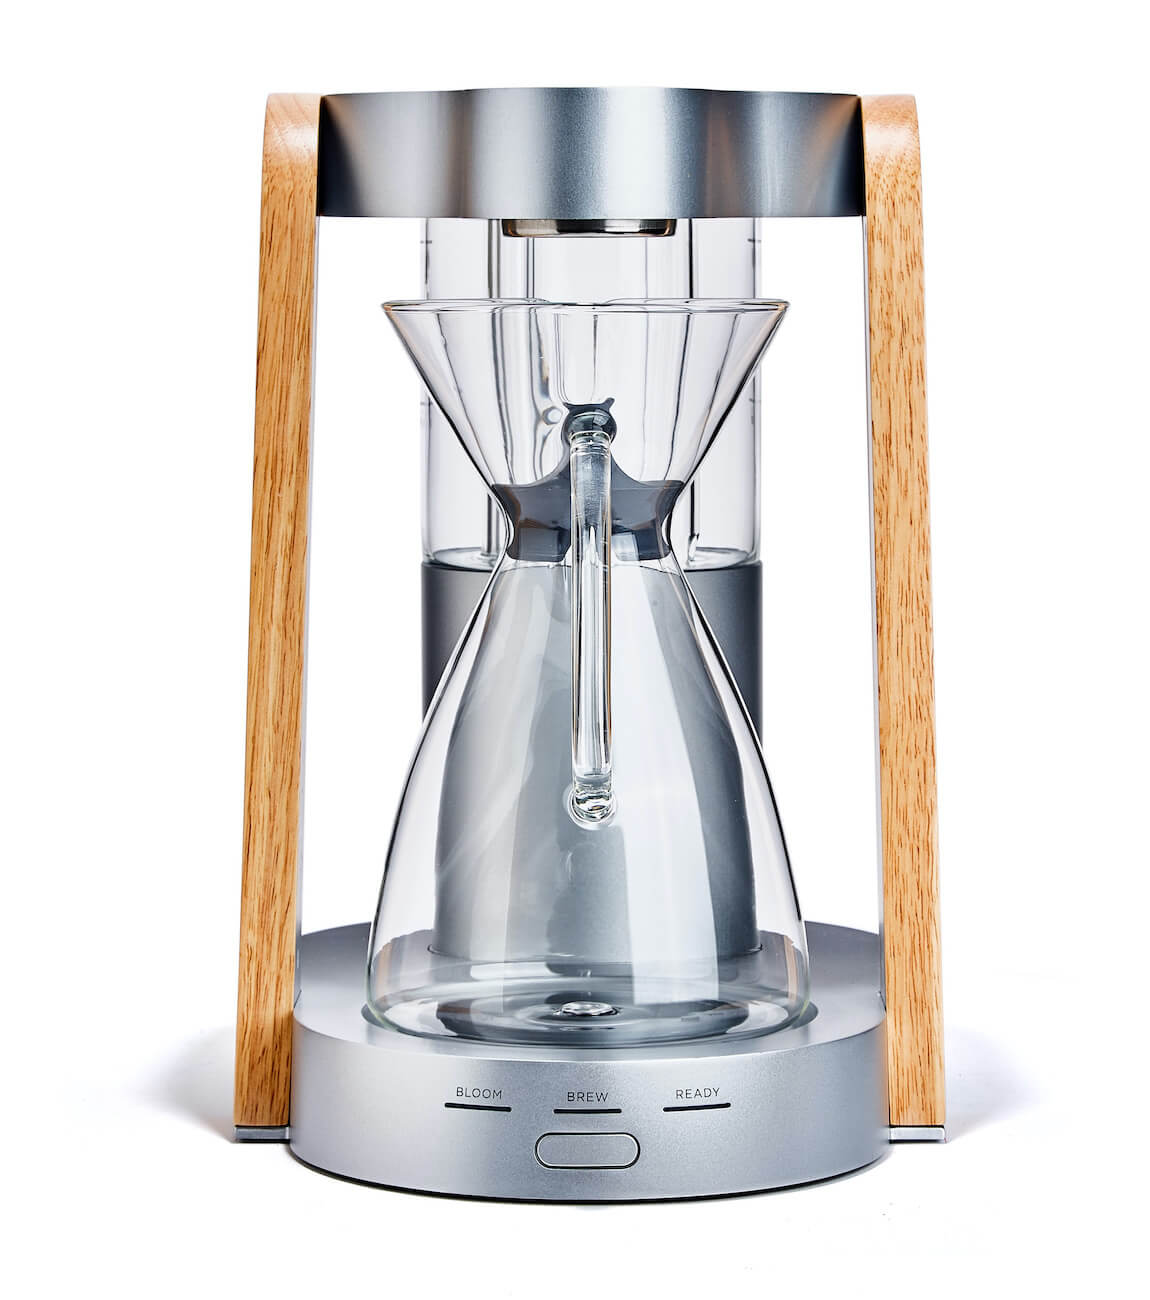 The Perfect Pour Over Coffee Maker For Your Everyday - Ratio Eight